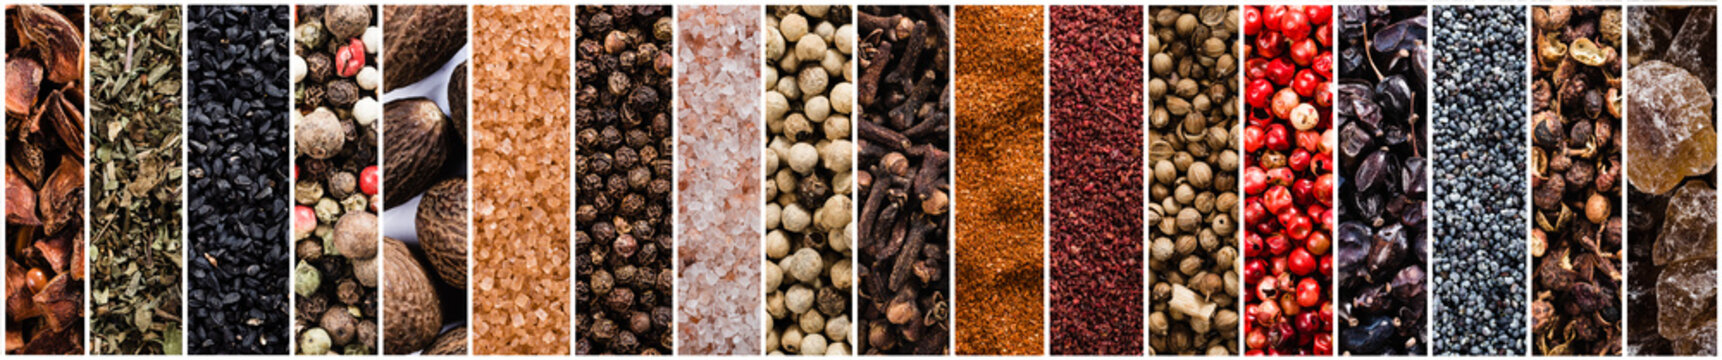 Spice and herbs background